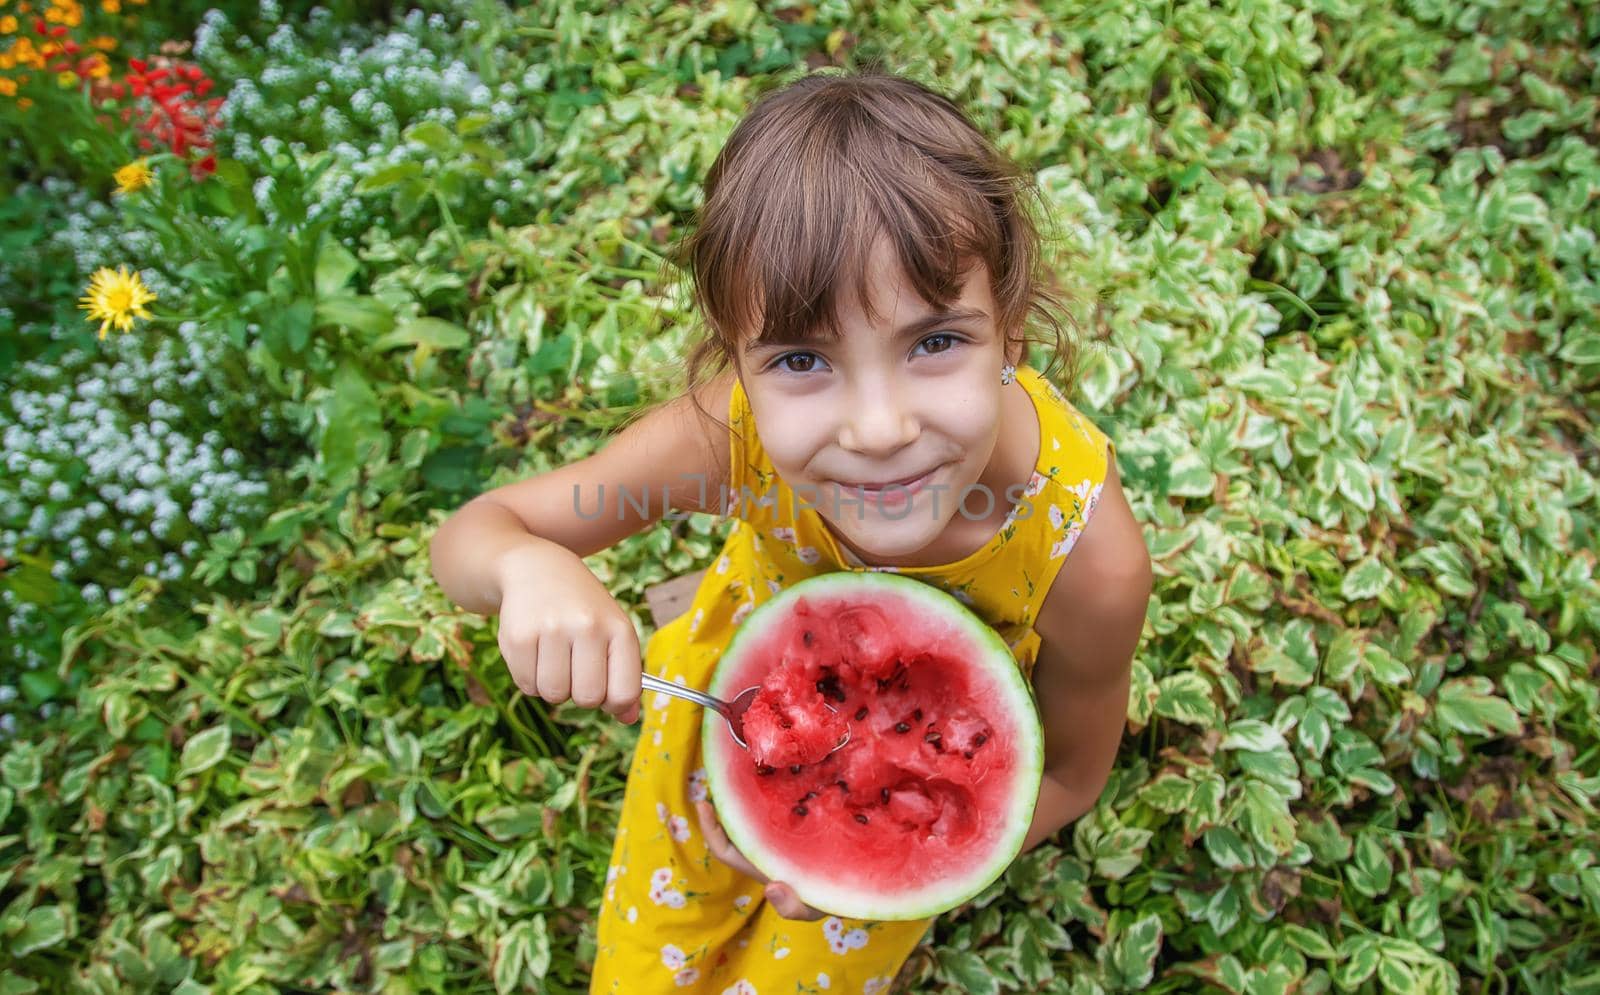 The child eats a watermelon with a spoon. Selective focus.